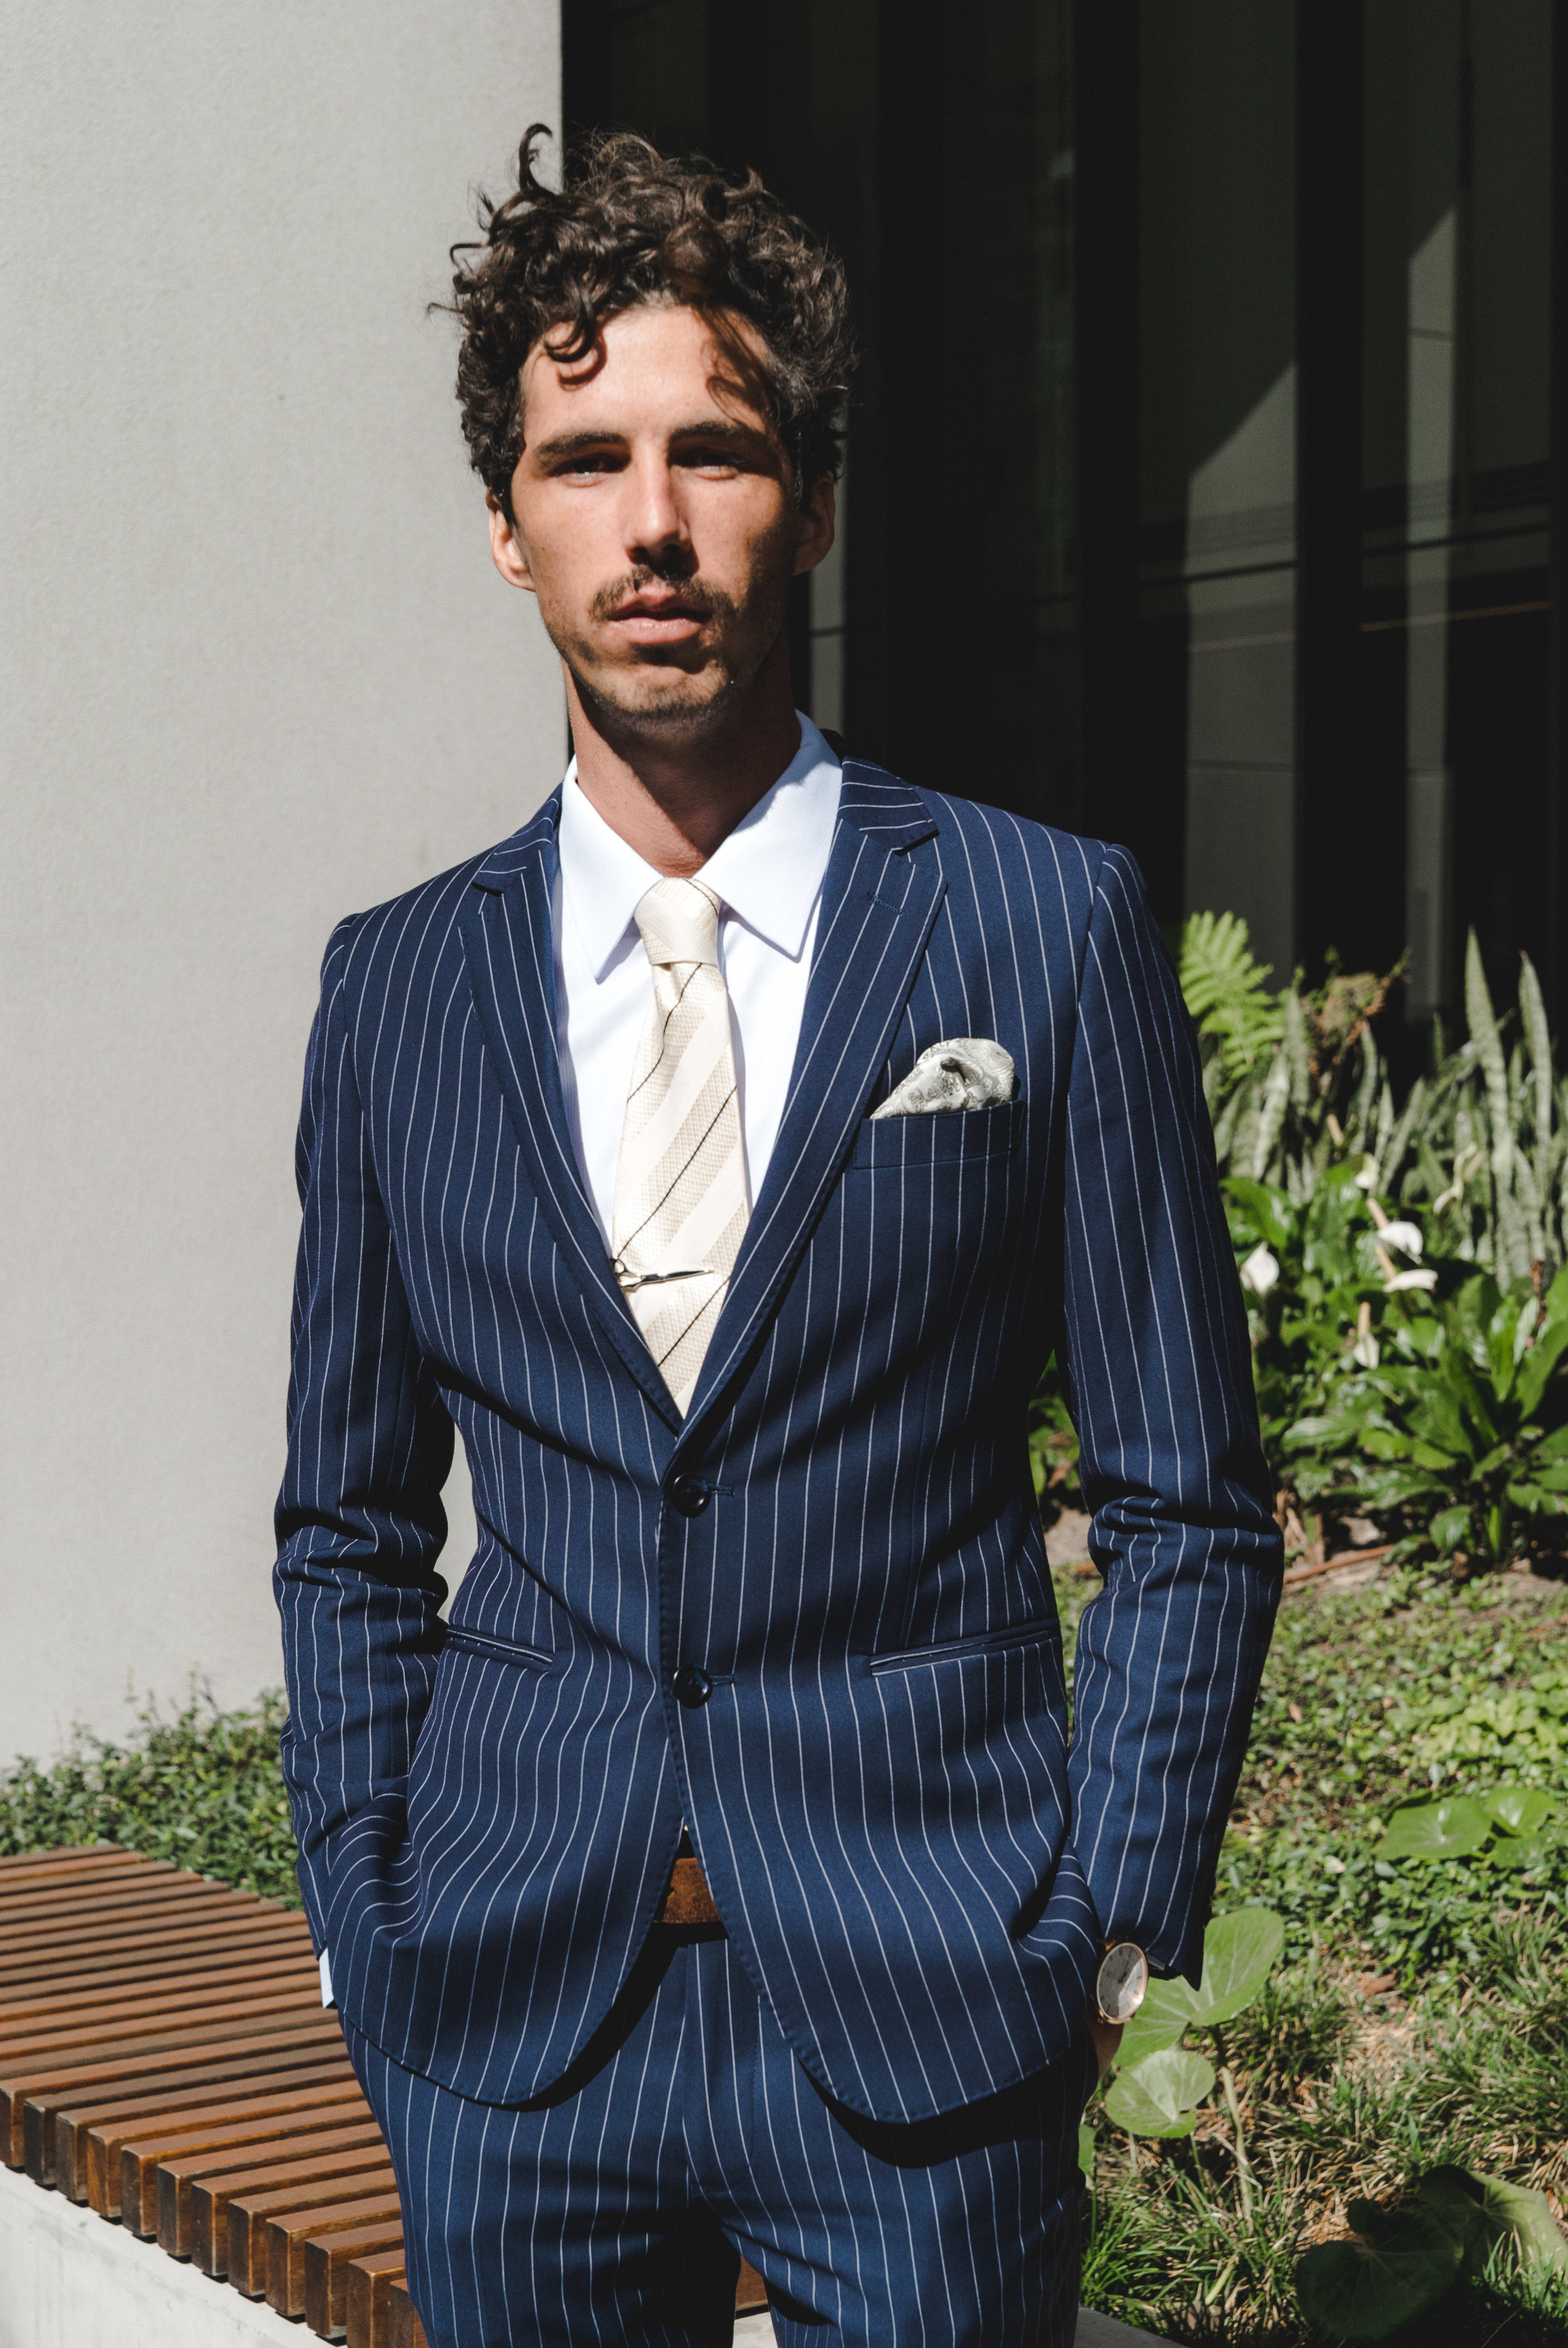 Gallery — Meticulo Australia | Tailored Suits and Shirts